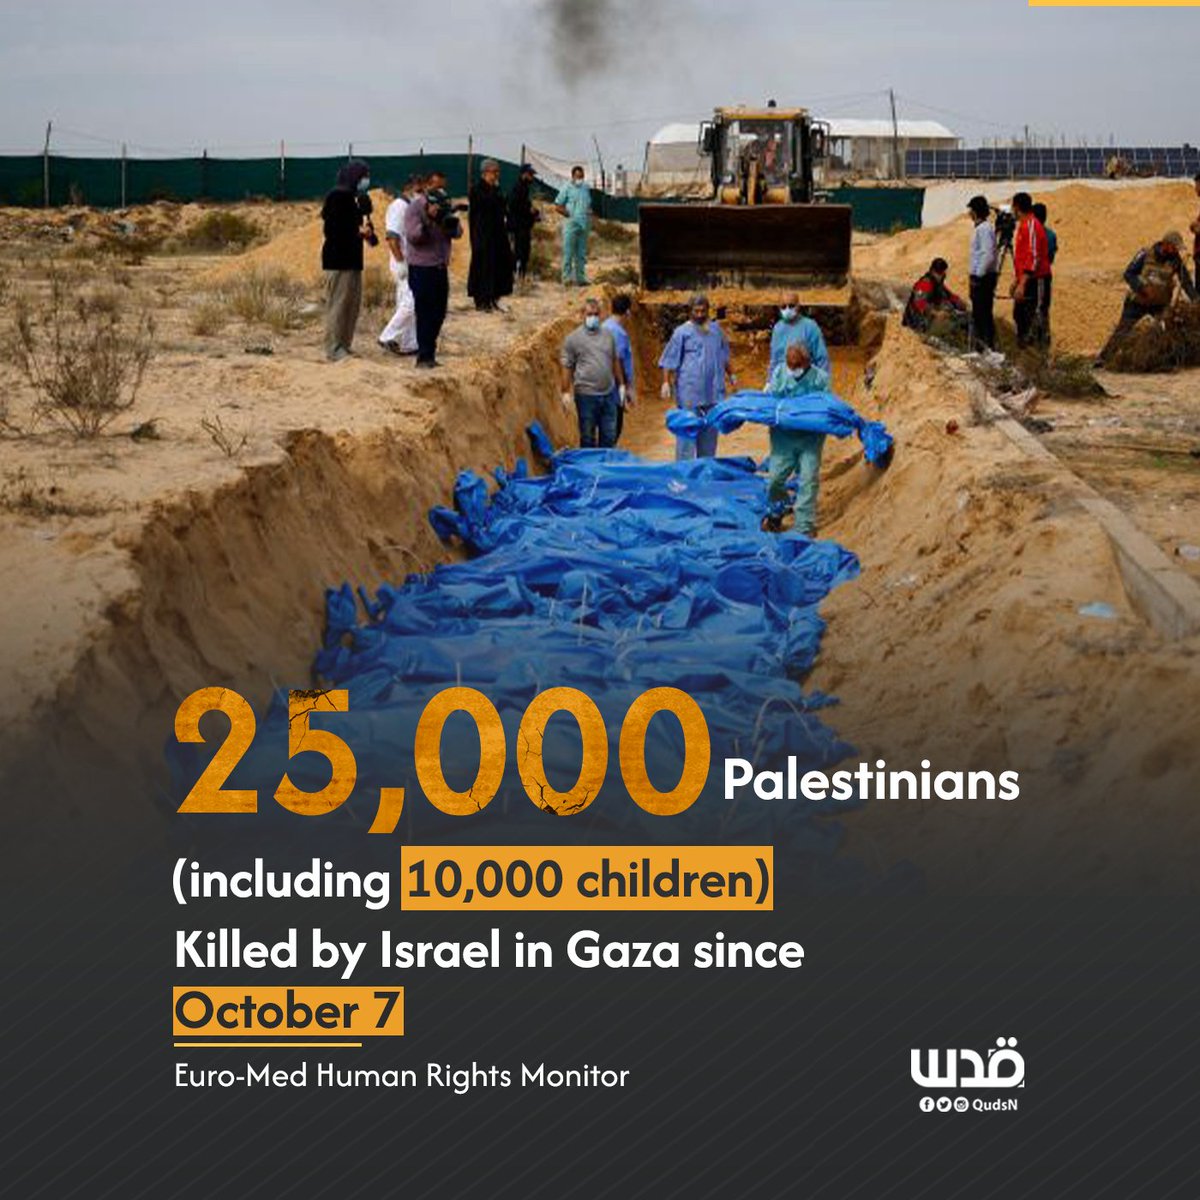 The Geneva-based Euro-Med Human Rights Monitor estimates the real number of Palestinians killed since the beginning of the Israeli genocide campaign in Gaza at 25,000, including 10,000 children, given the fact that AT LEAST 8,000 people have been trapped beneath the rubble of…